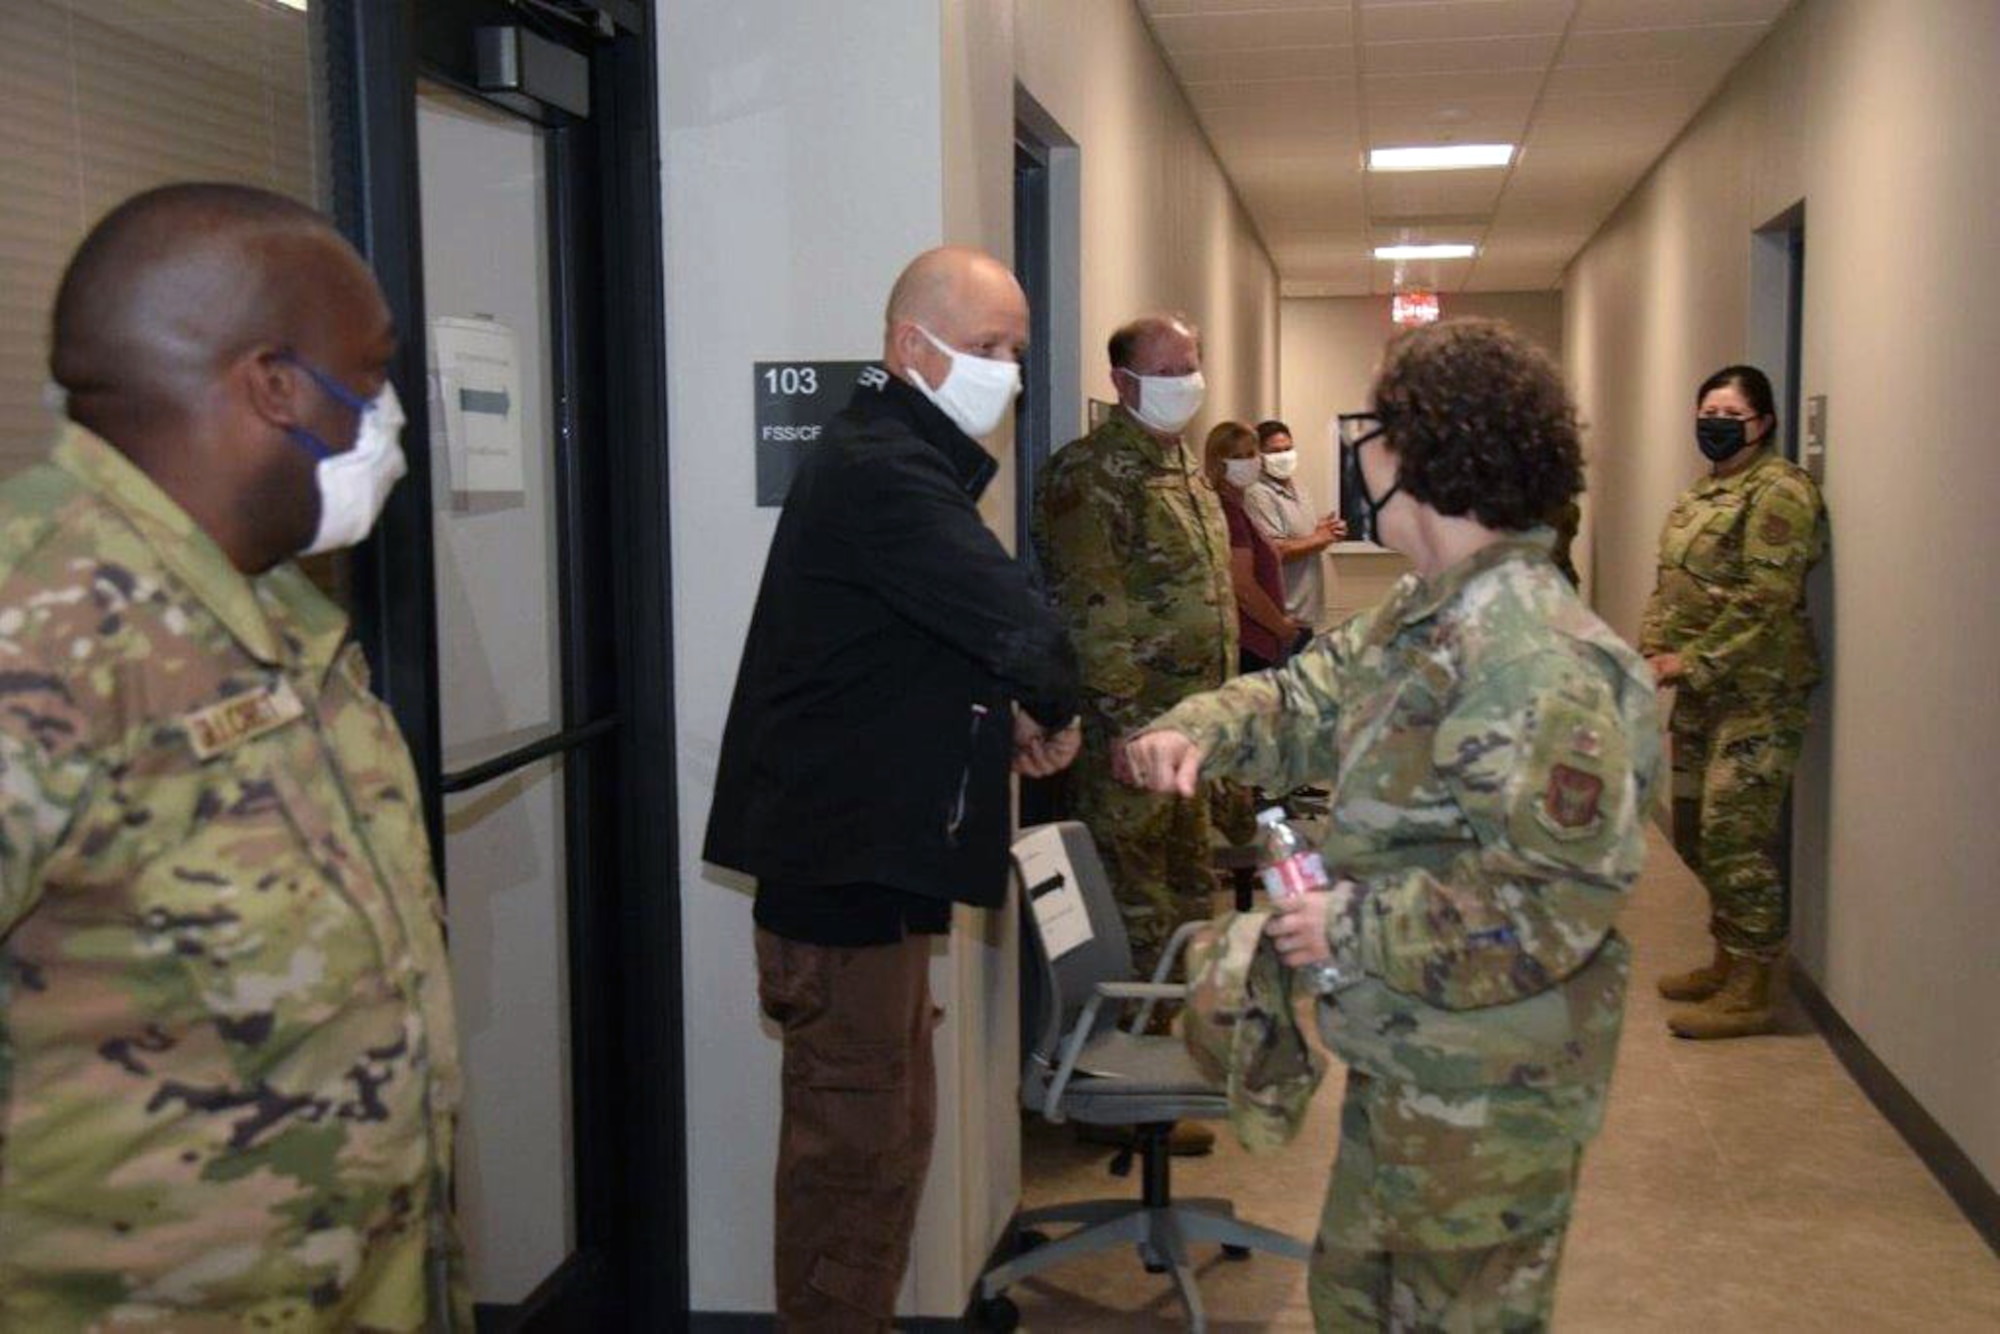 Col. Lisa M. Craig, Headquarters Air Force Reserve Command A1 director of manpower, personnel and services, Robins Air Force Base, Georgia, is greeted by Kenneth Vogel, 433rd Force Support Squadron computer assistant, during a tour of building 817 here on June 18, 2020.